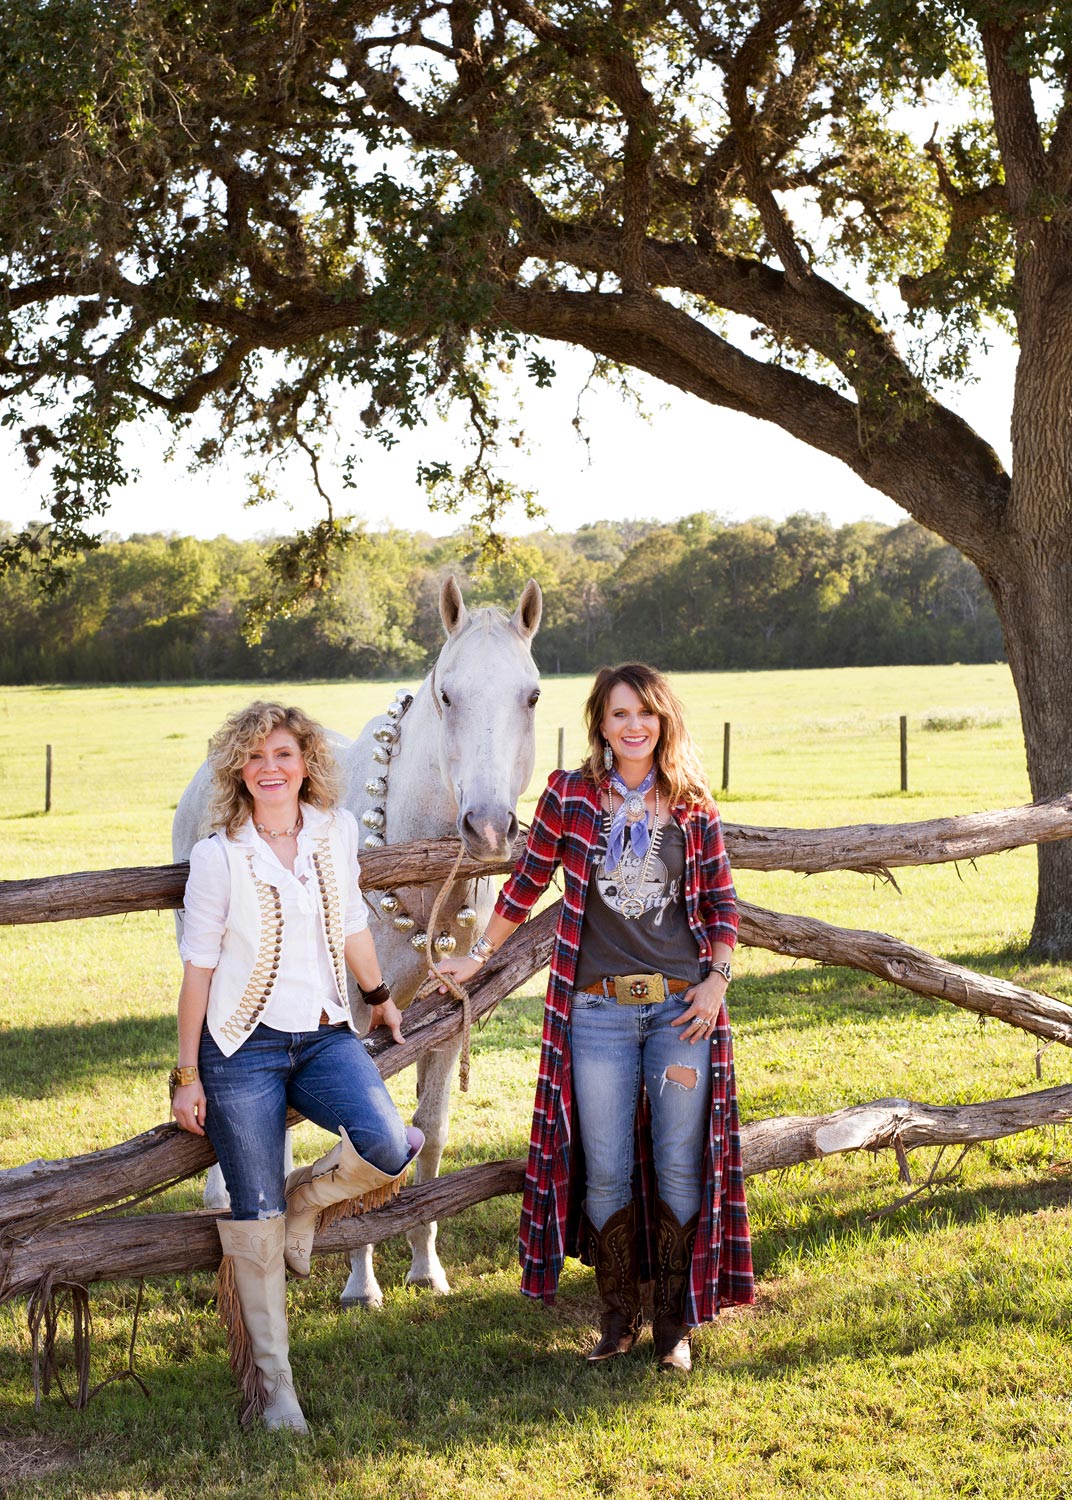 Junk Gypsy sisters for Country Living by Austin based lifestyle photographer Buff Strickland